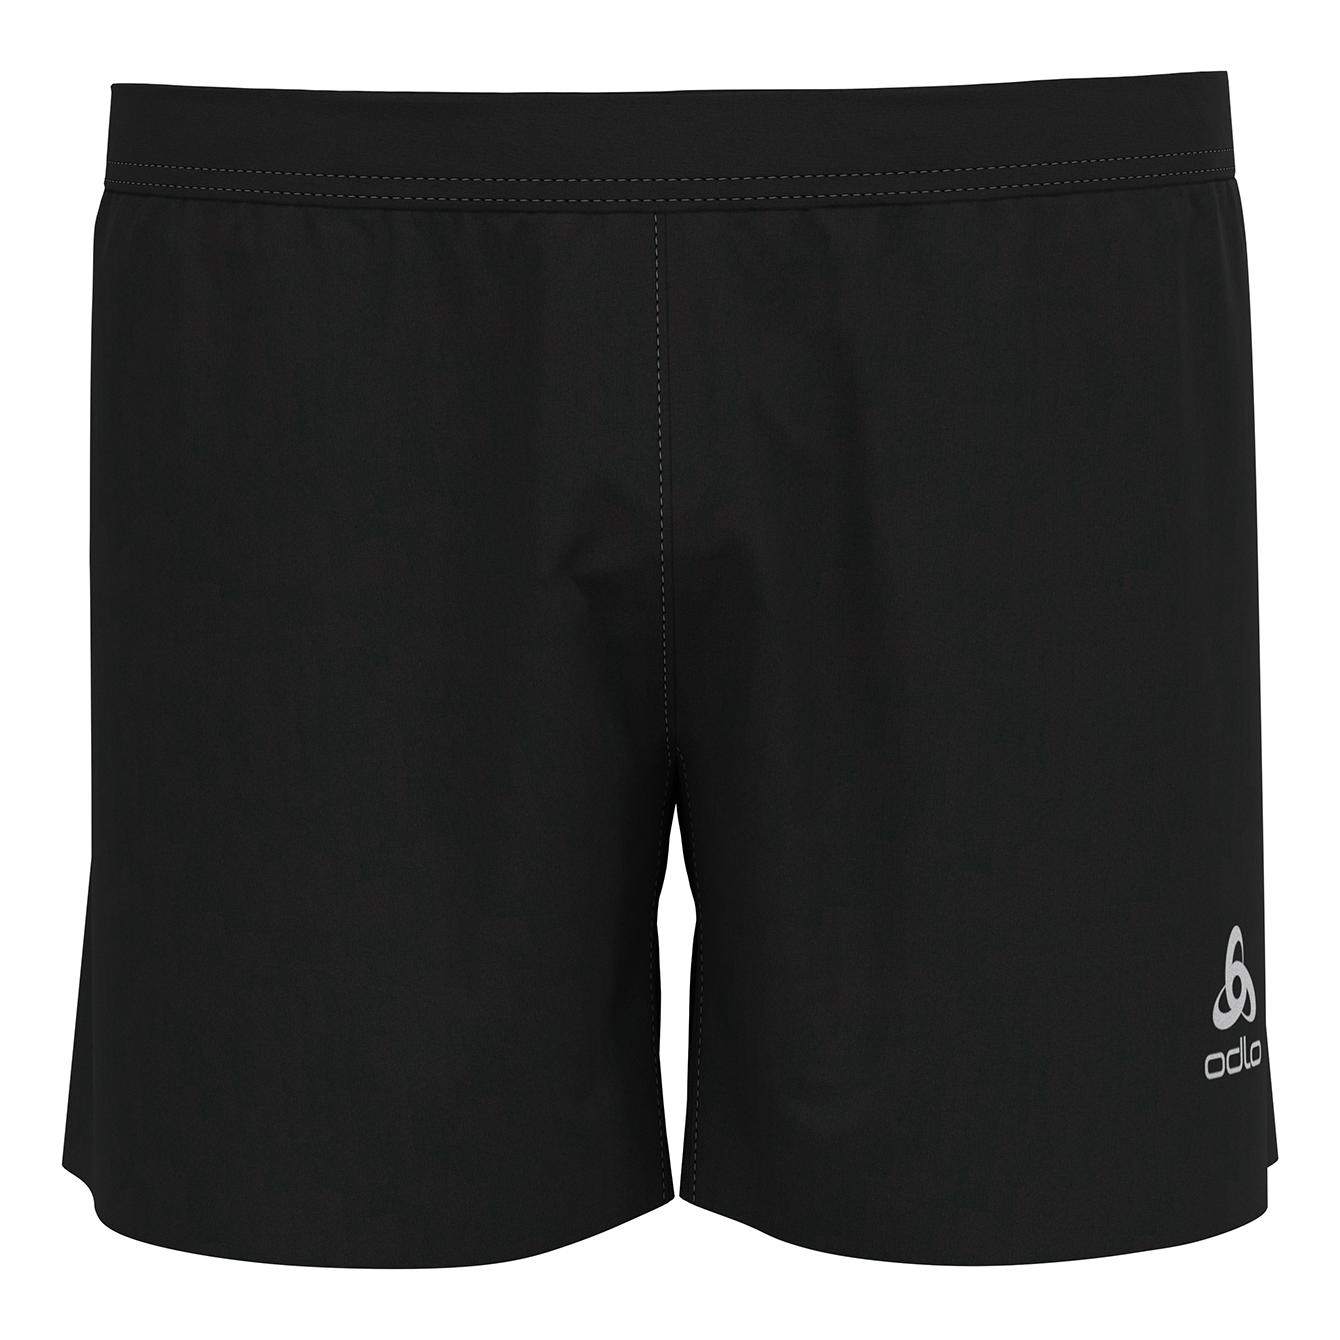 Odlo Zeroweight 5 Inches Shorts Noir S 